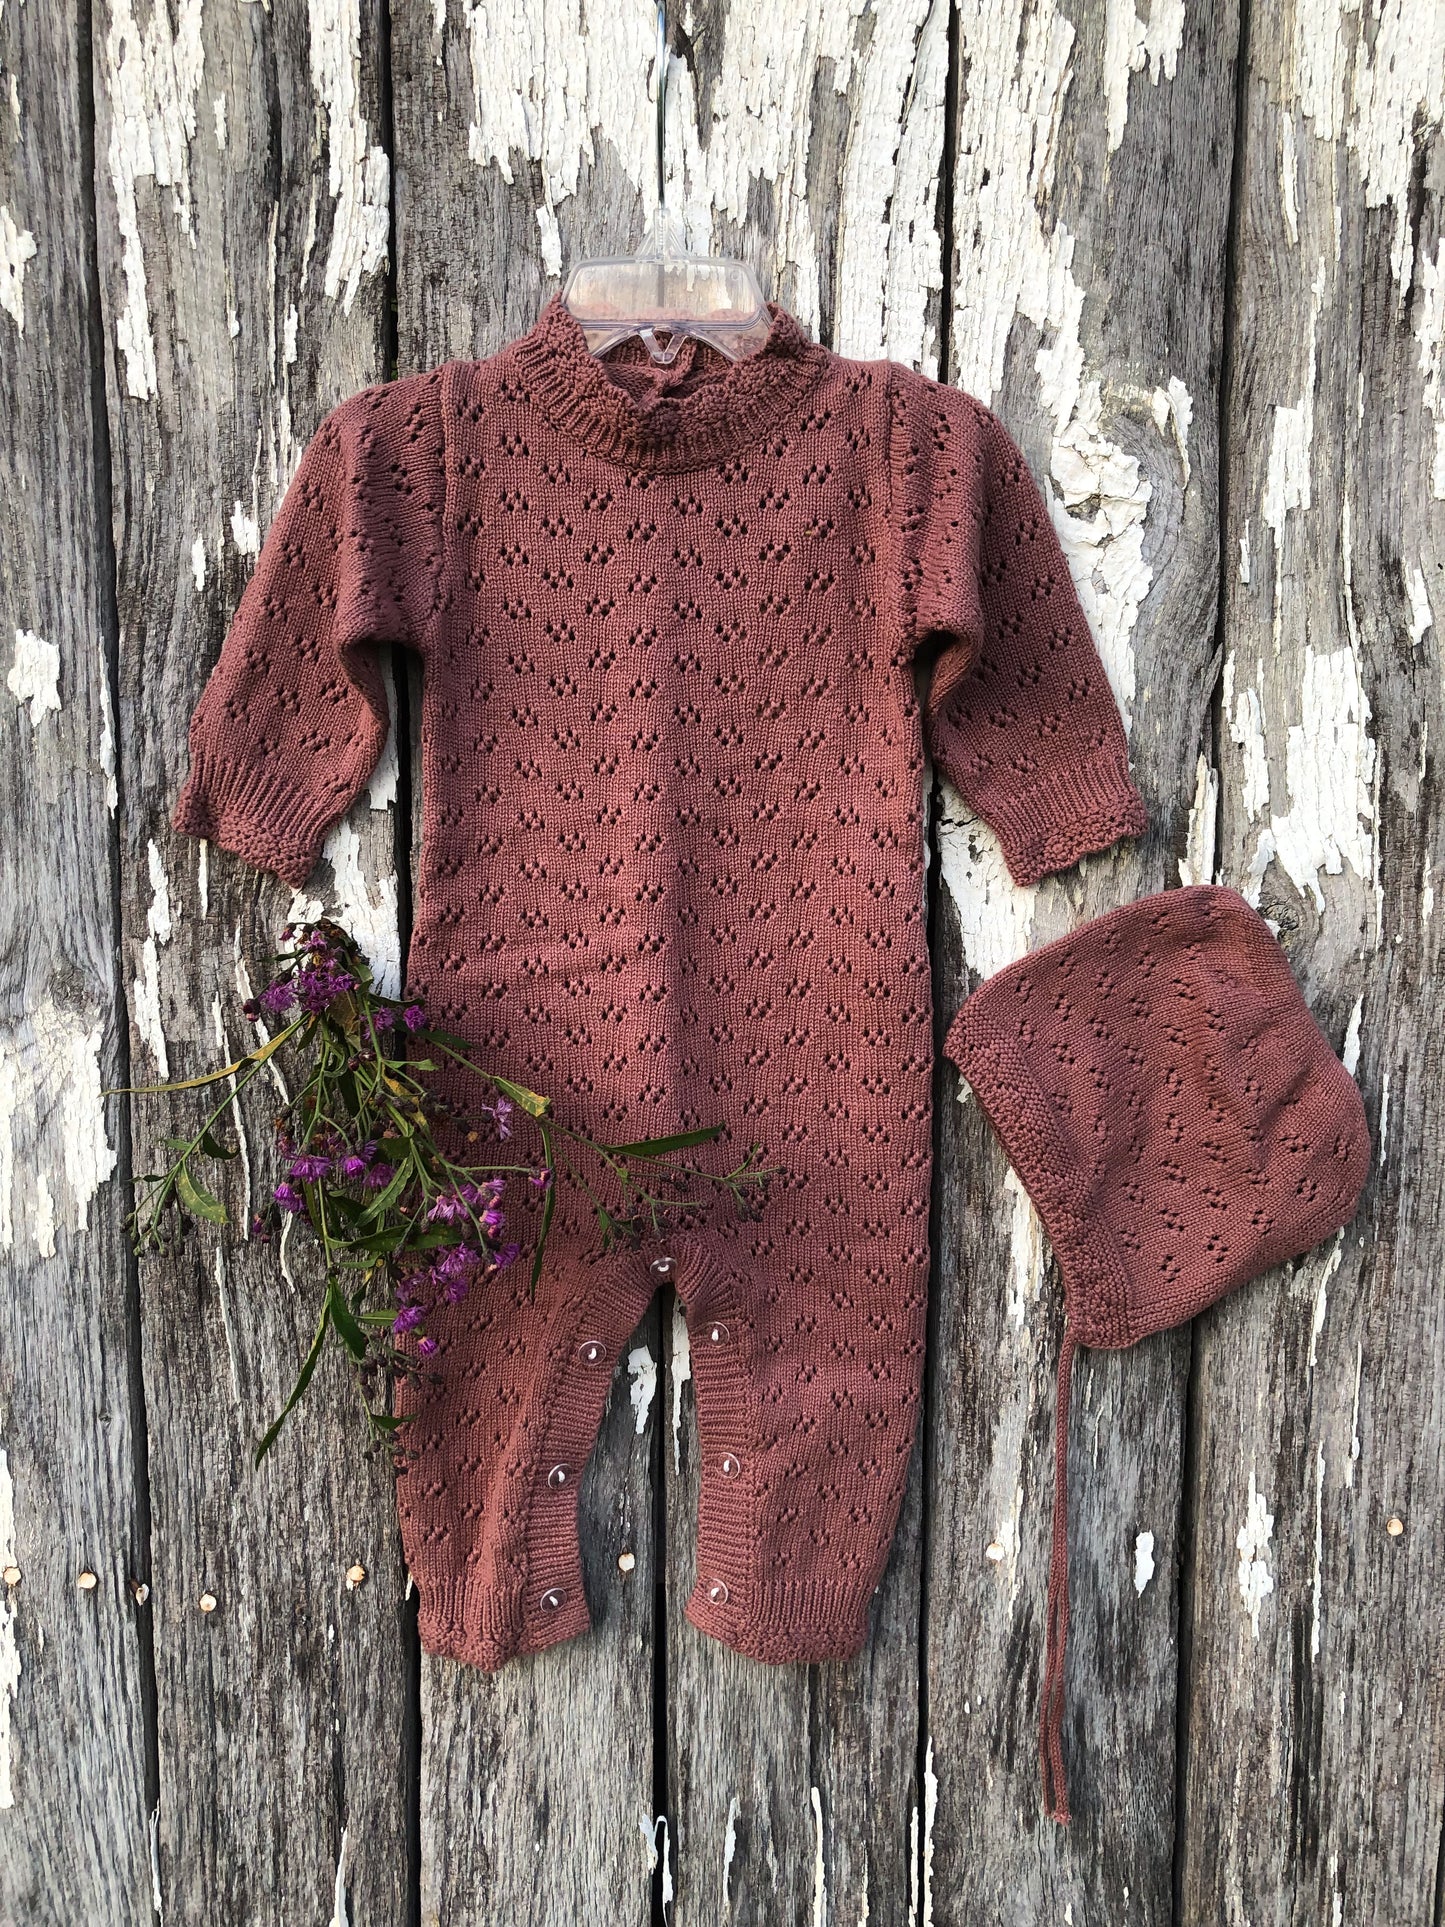 Plum Knitted Romper with Matching Bonnet